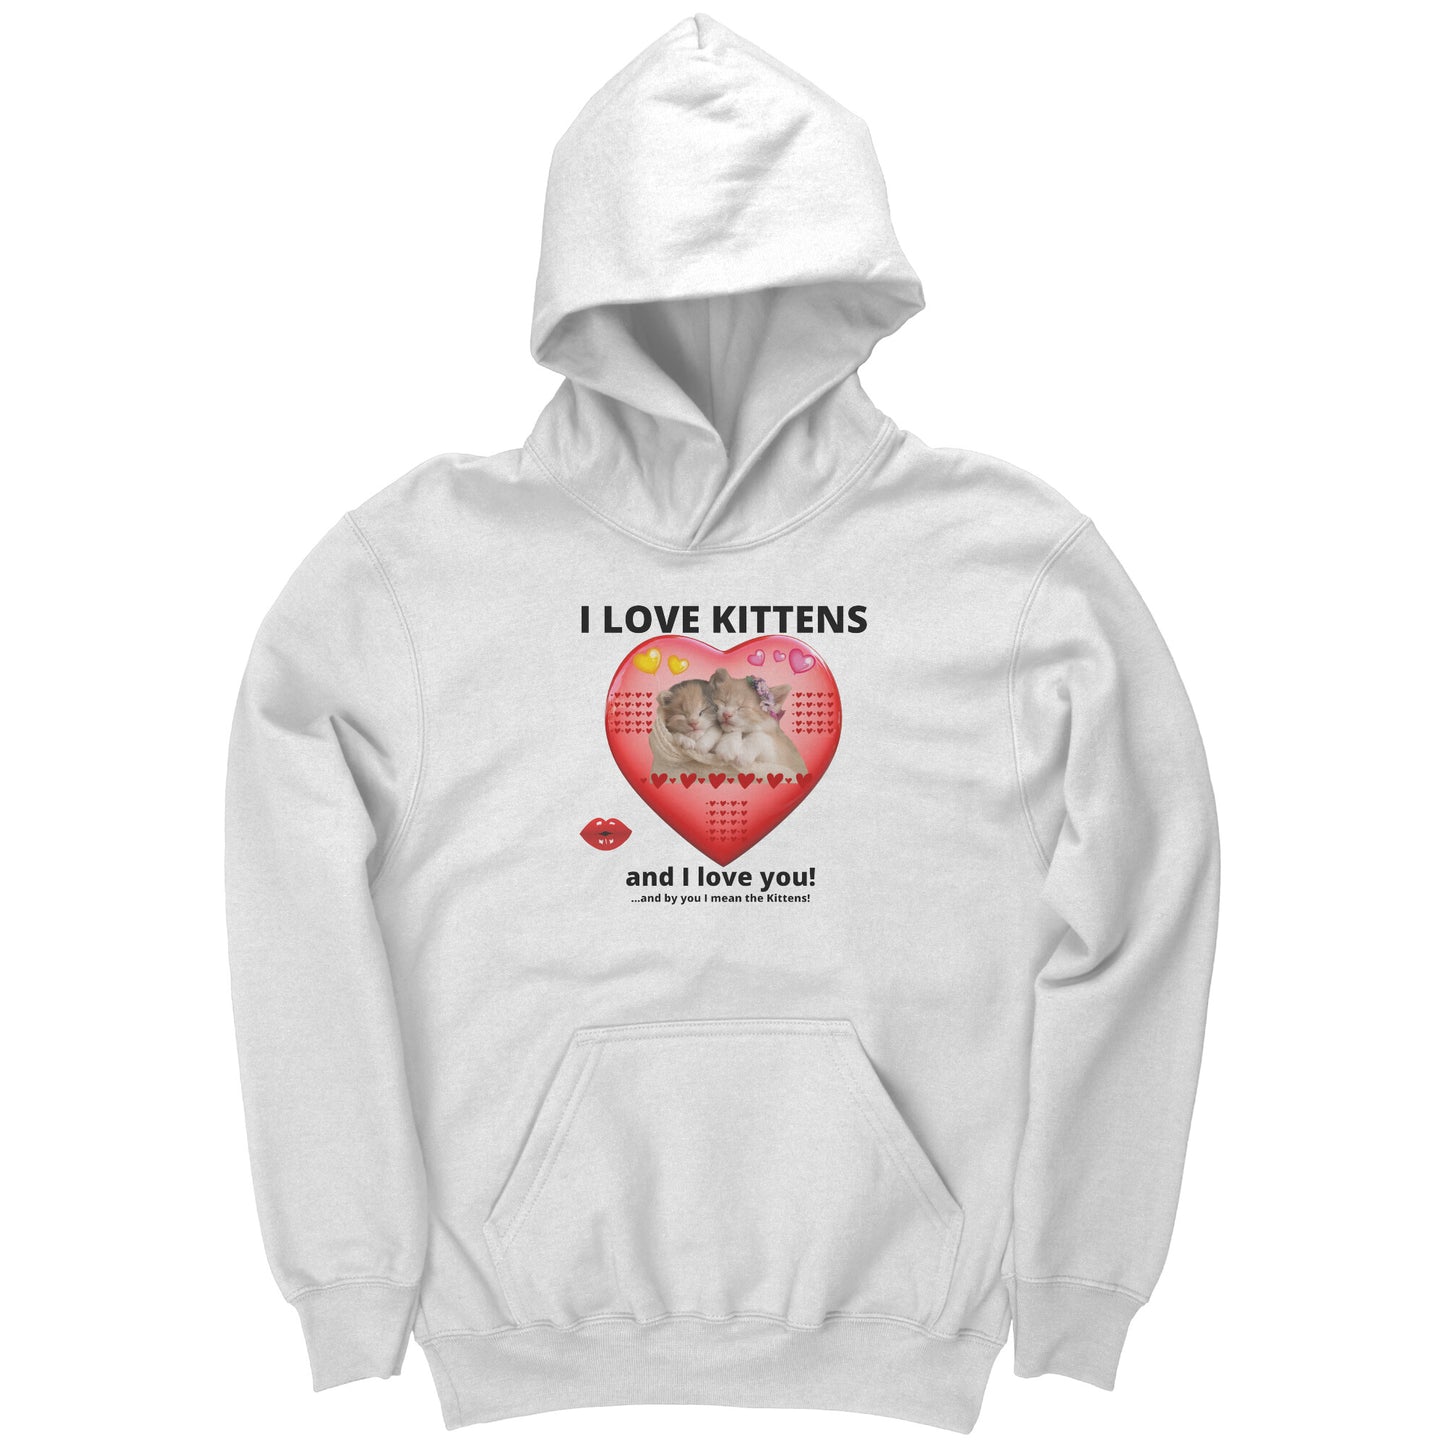 I love kittens and I love you Youth Hoodie